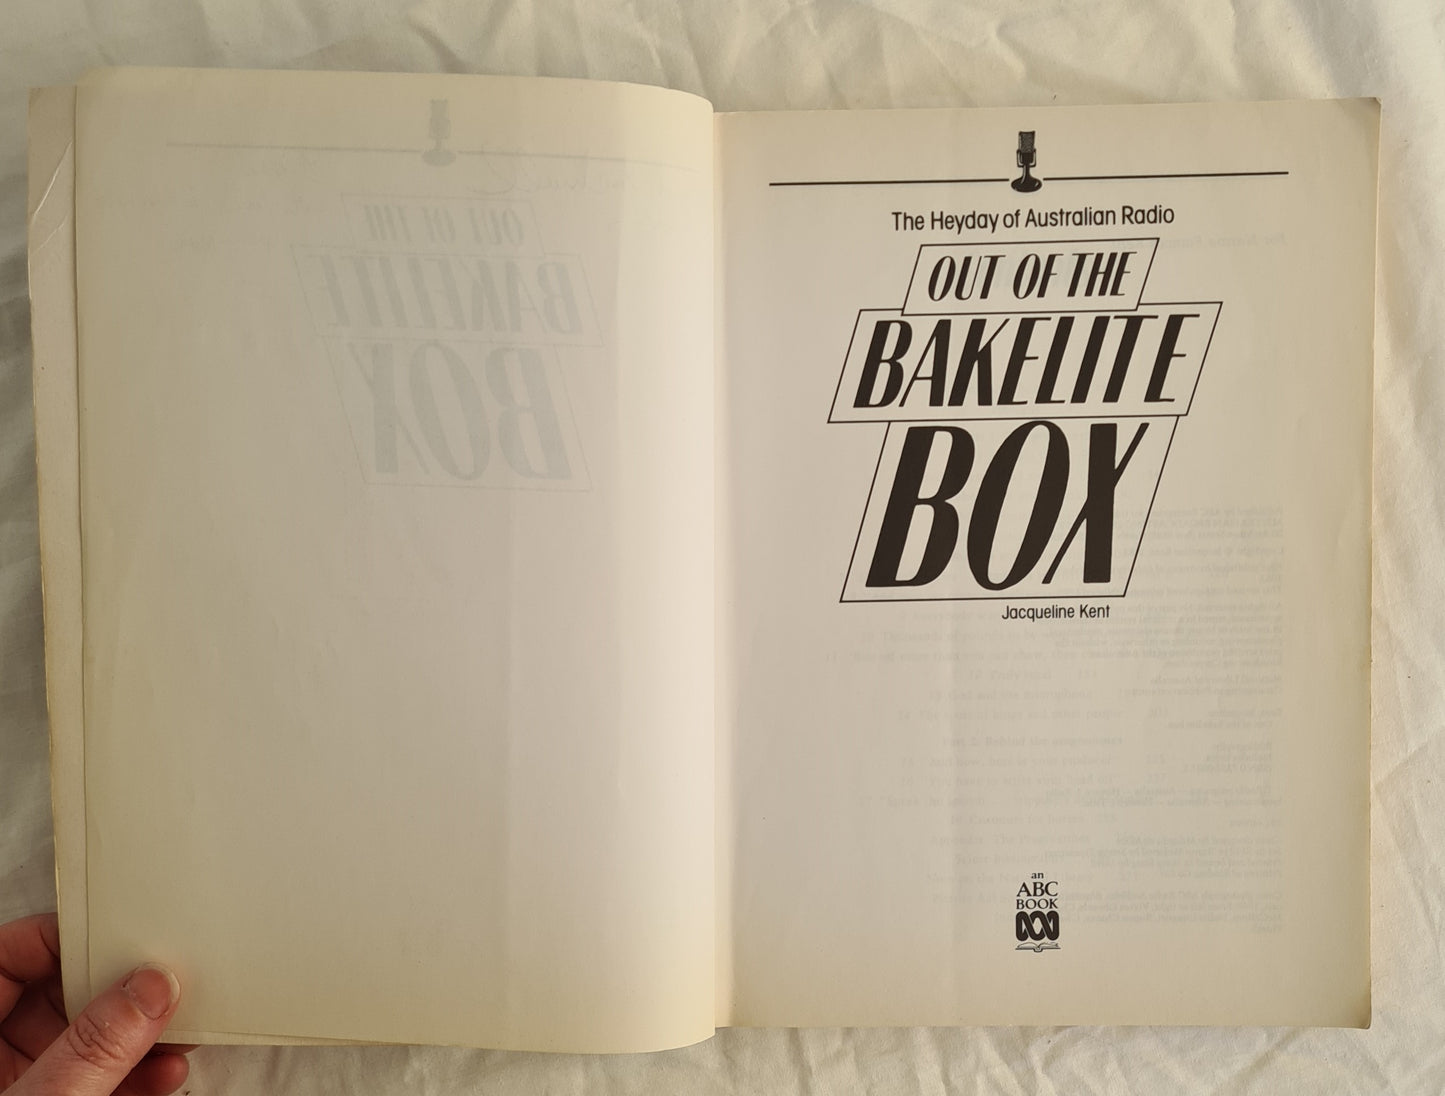 Out of the Bakelite Box by Jacqueline Kent